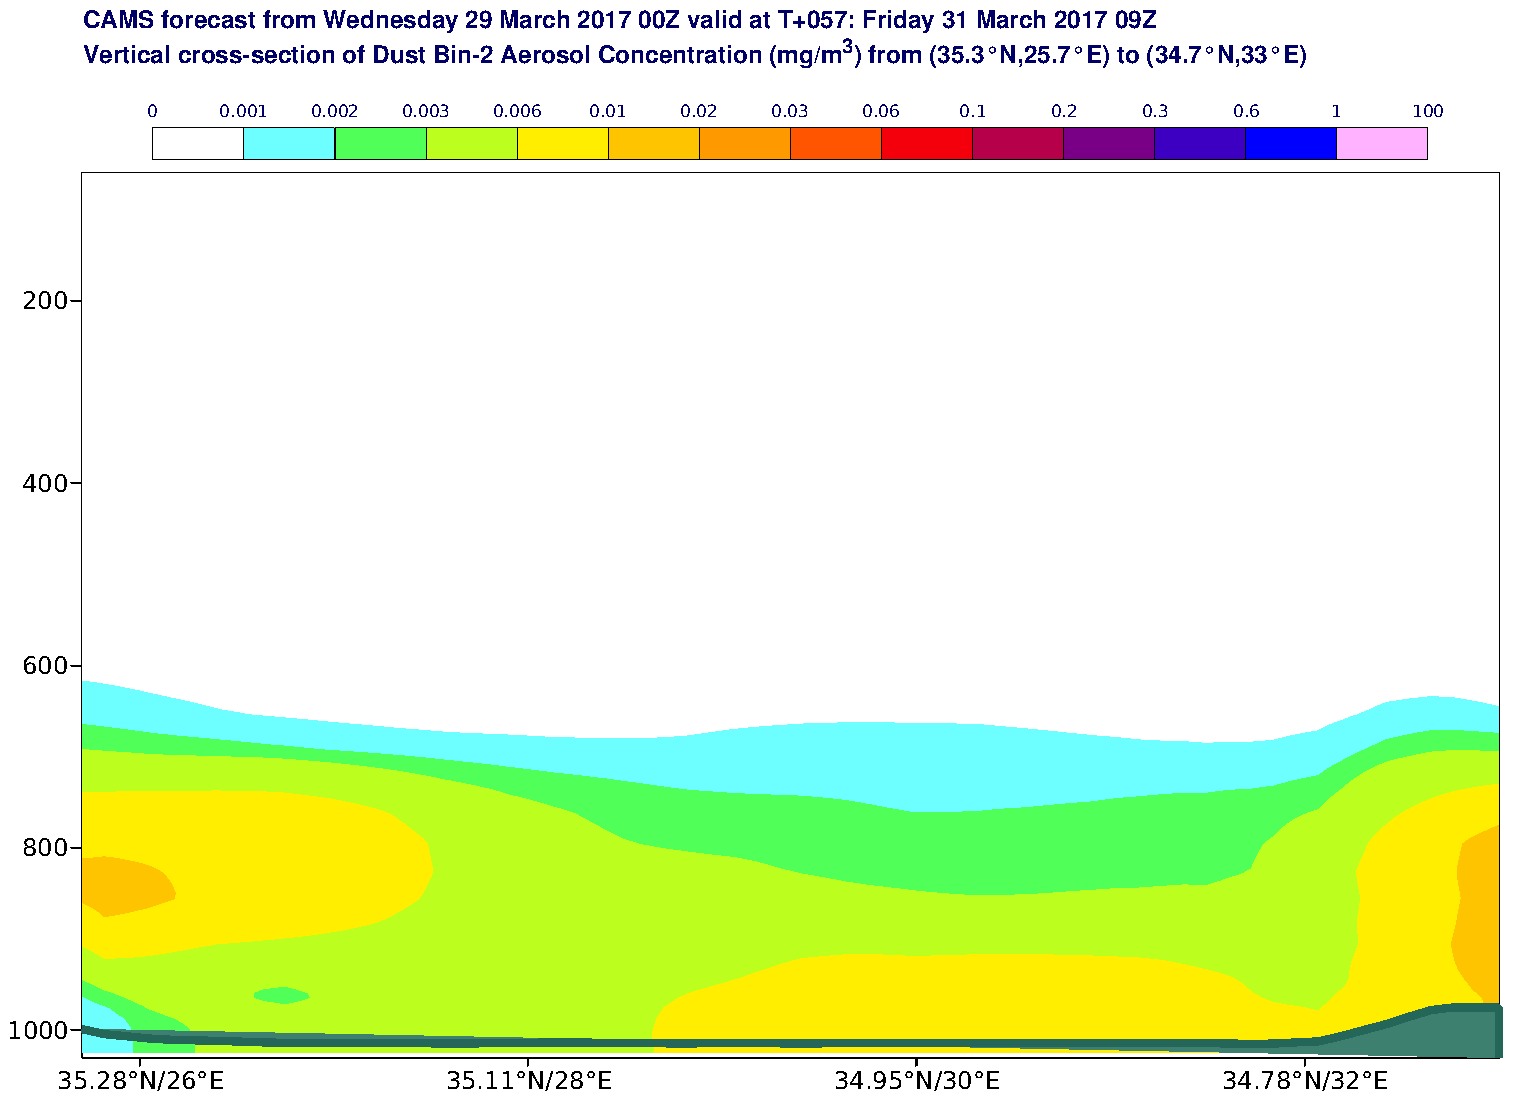 Vertical cross-section of Dust Bin-2 Aerosol Concentration (mg/m3) valid at T57 - 2017-03-31 09:00